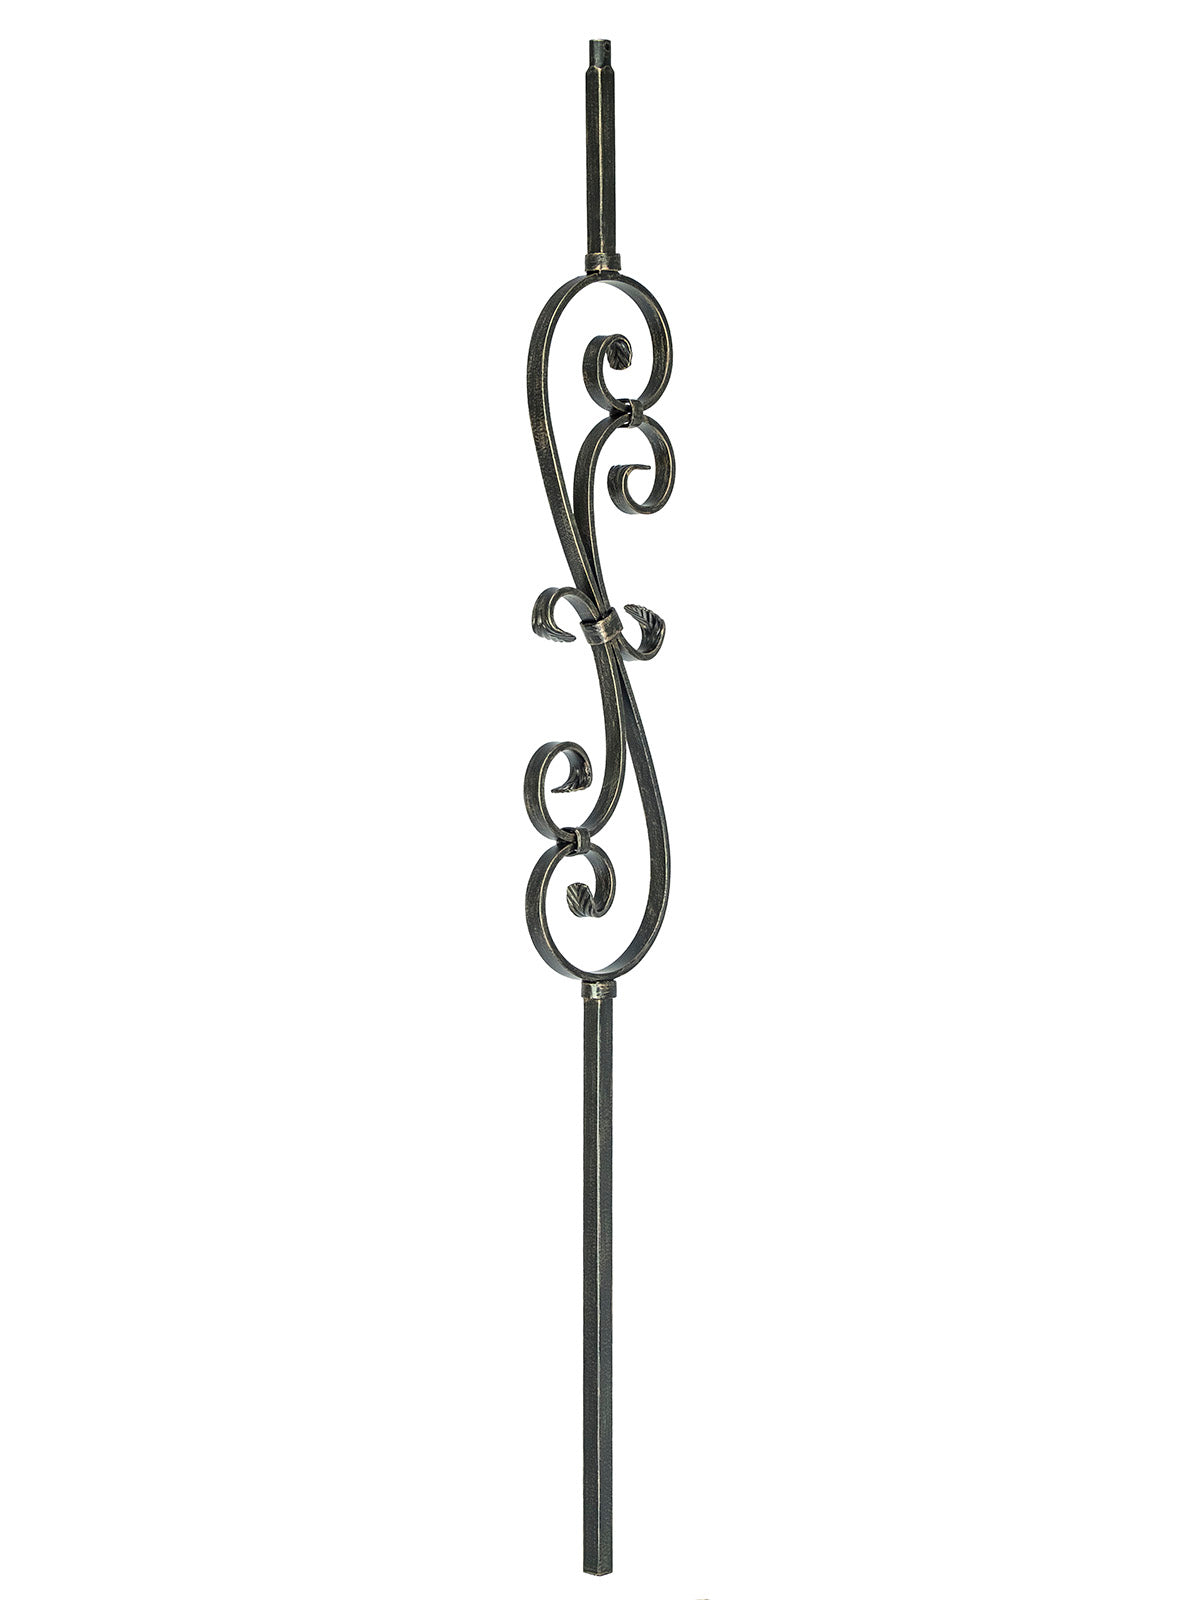 Iron Baluster 2G56 - 5/8" Square - S Scroll: 5-3/4" W